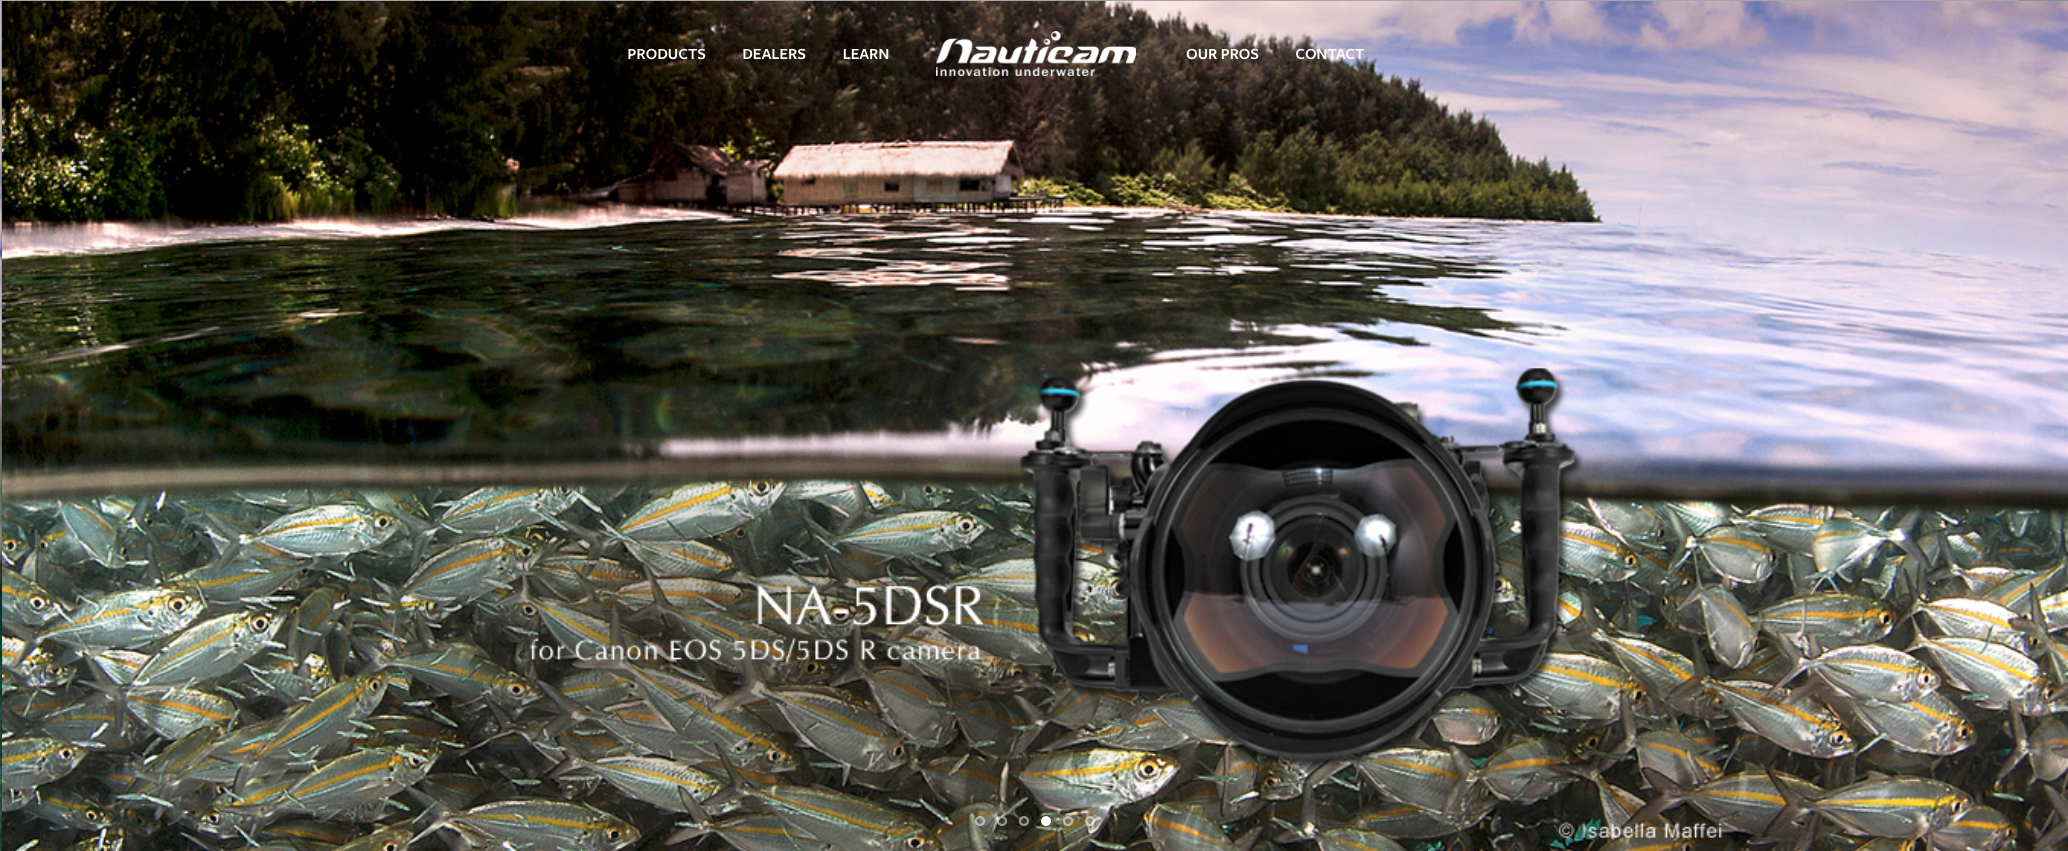 Isabella Maffei-Featured photographer on the official Nauticam website